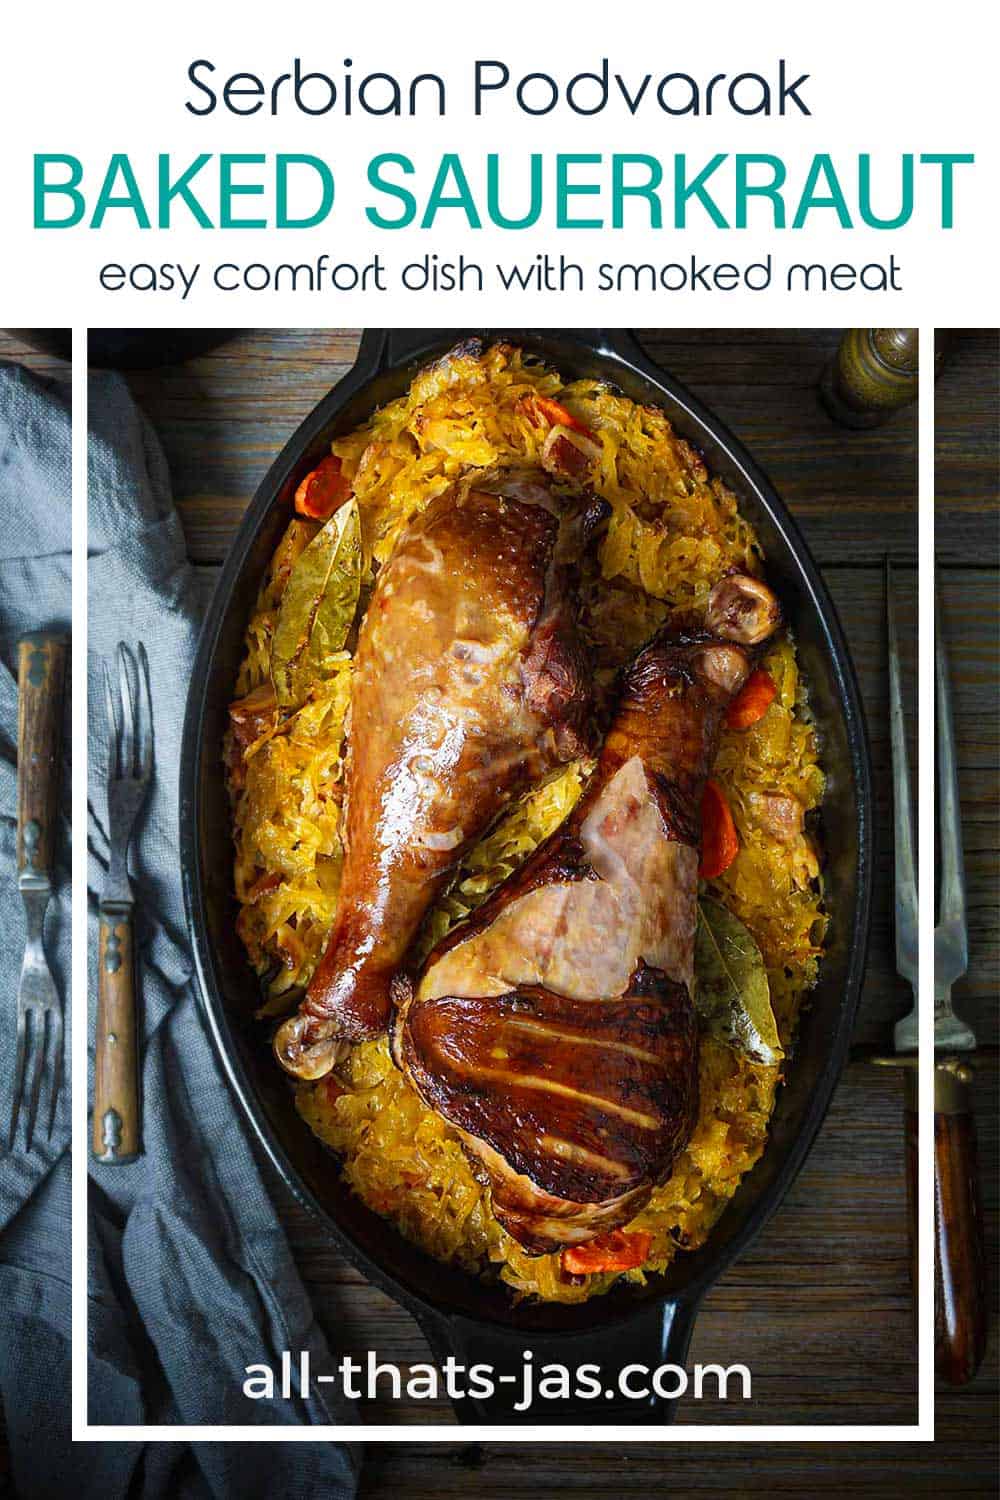 A dish with Serbian dish of sauerkraut and turkey meat with text overlay